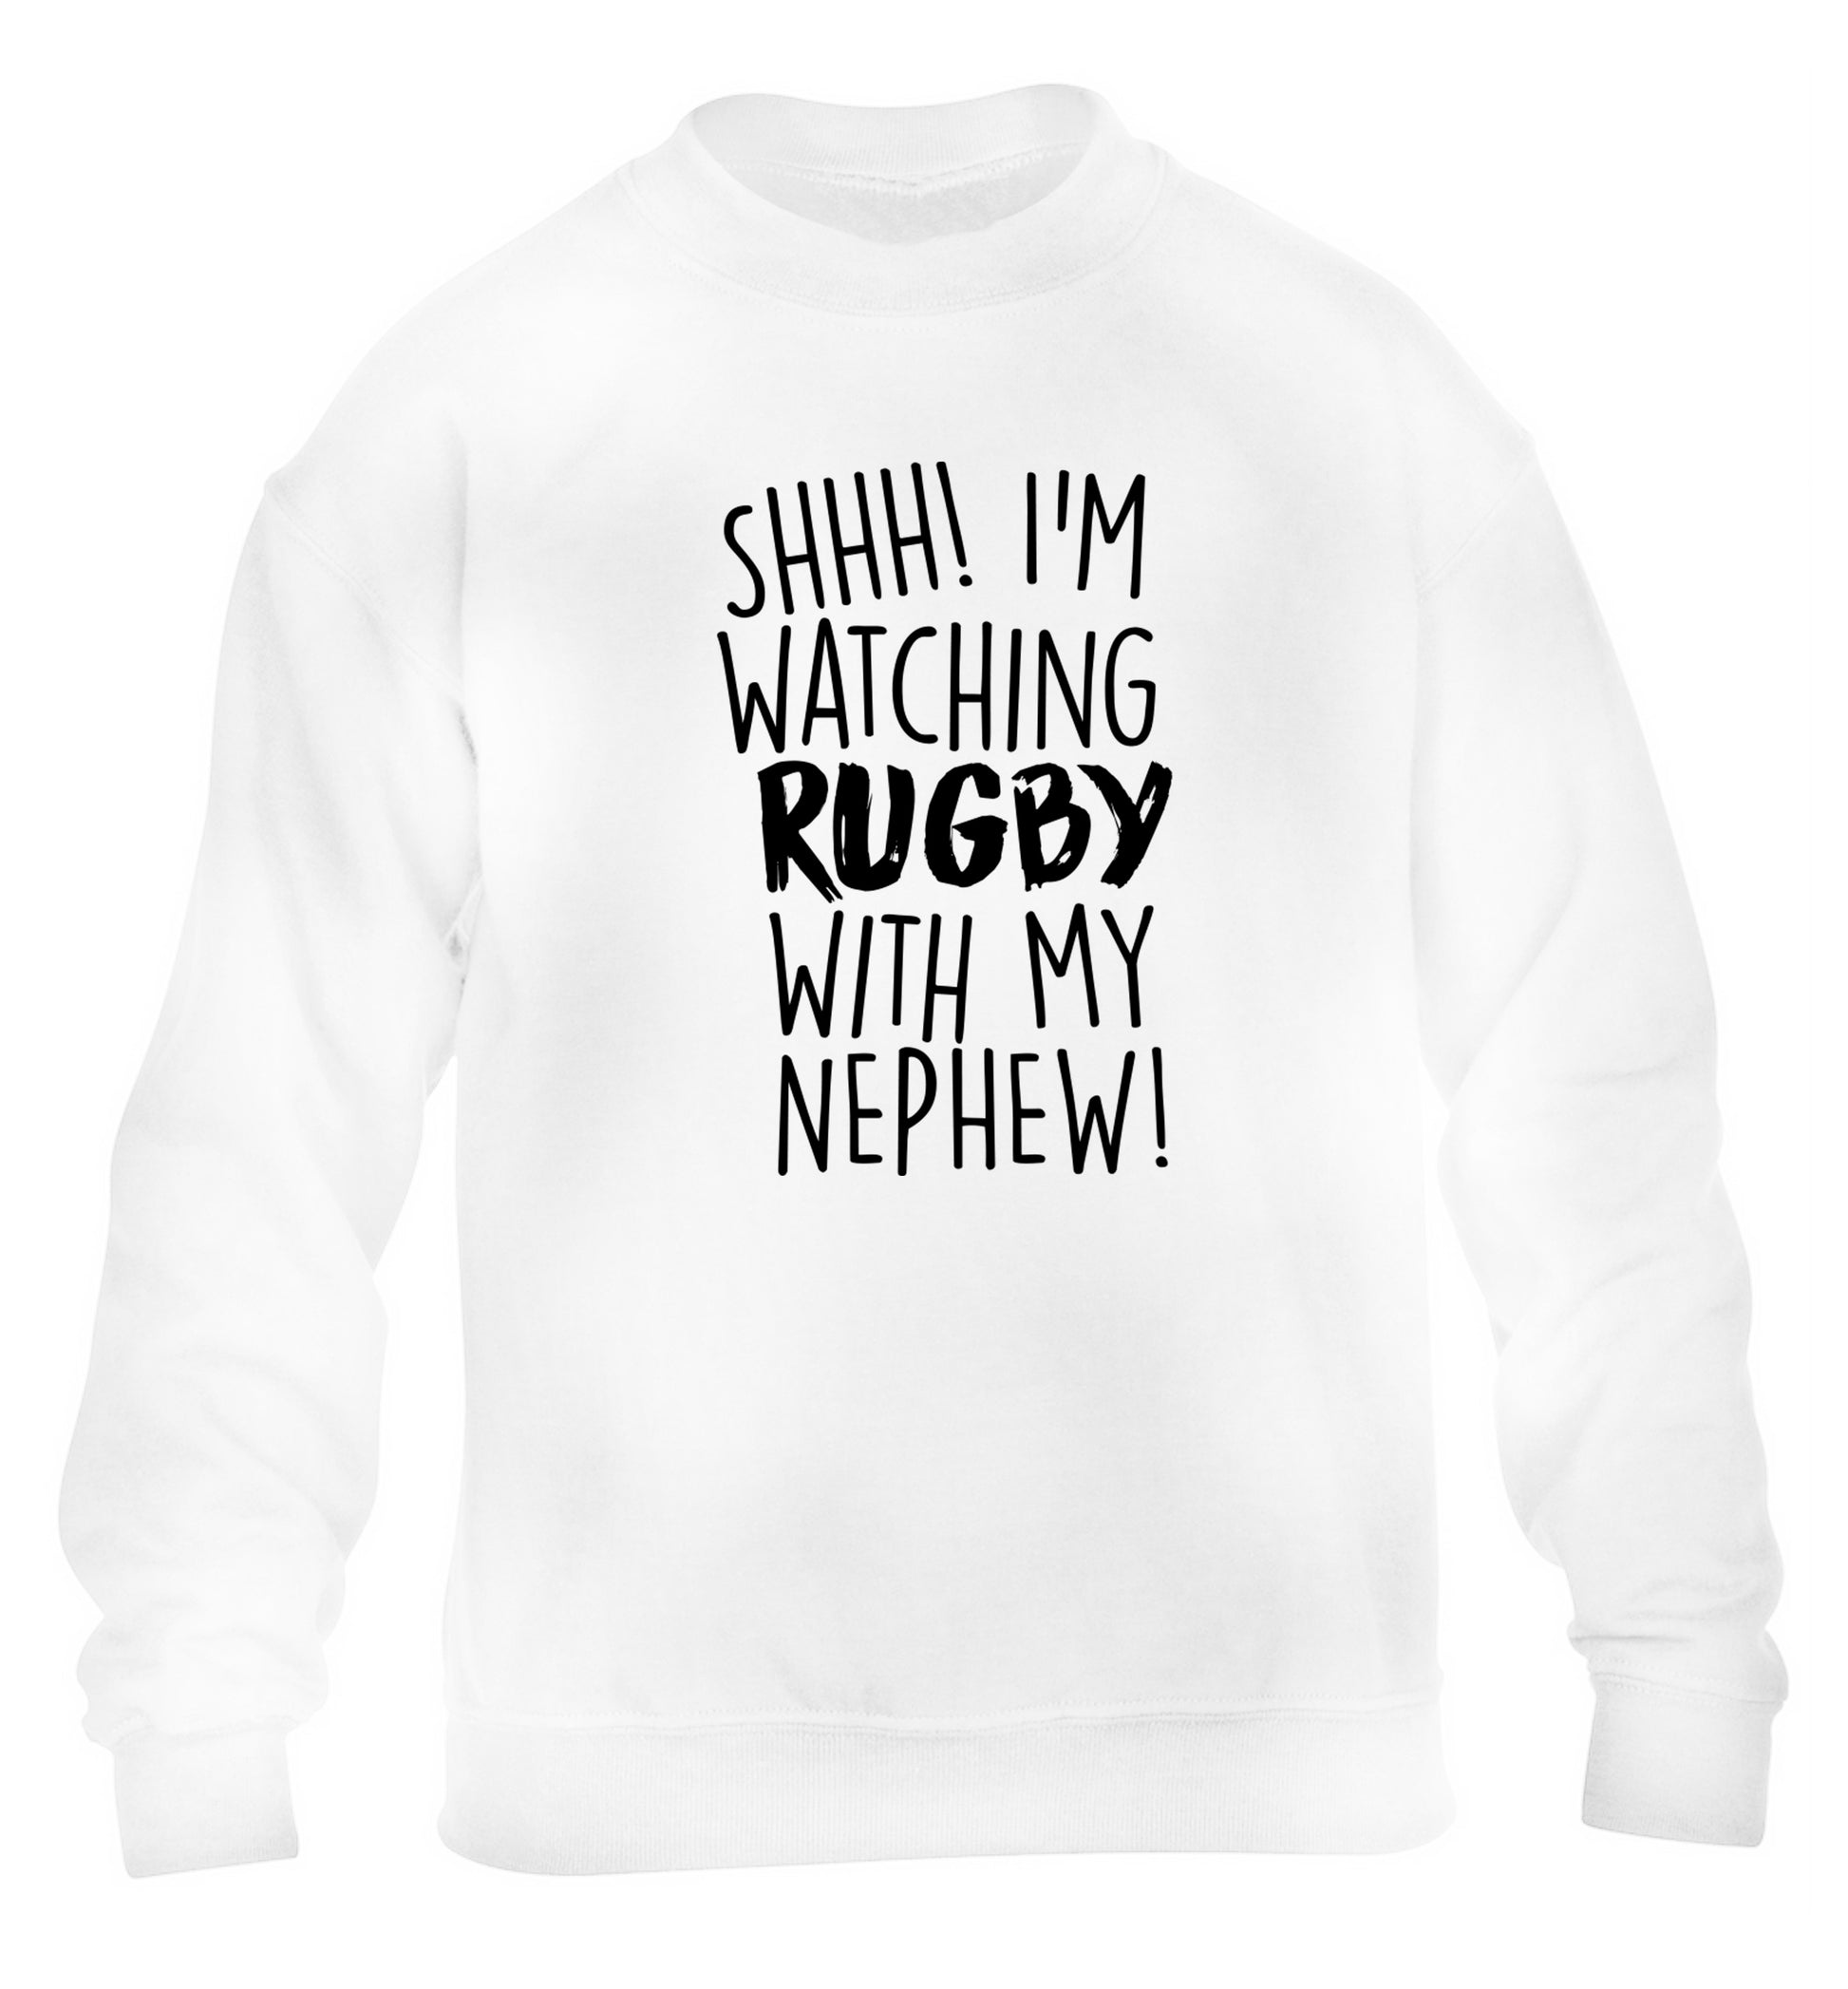 Shh.. I'm watching rugby with my nephew children's white sweater 12-13 Years